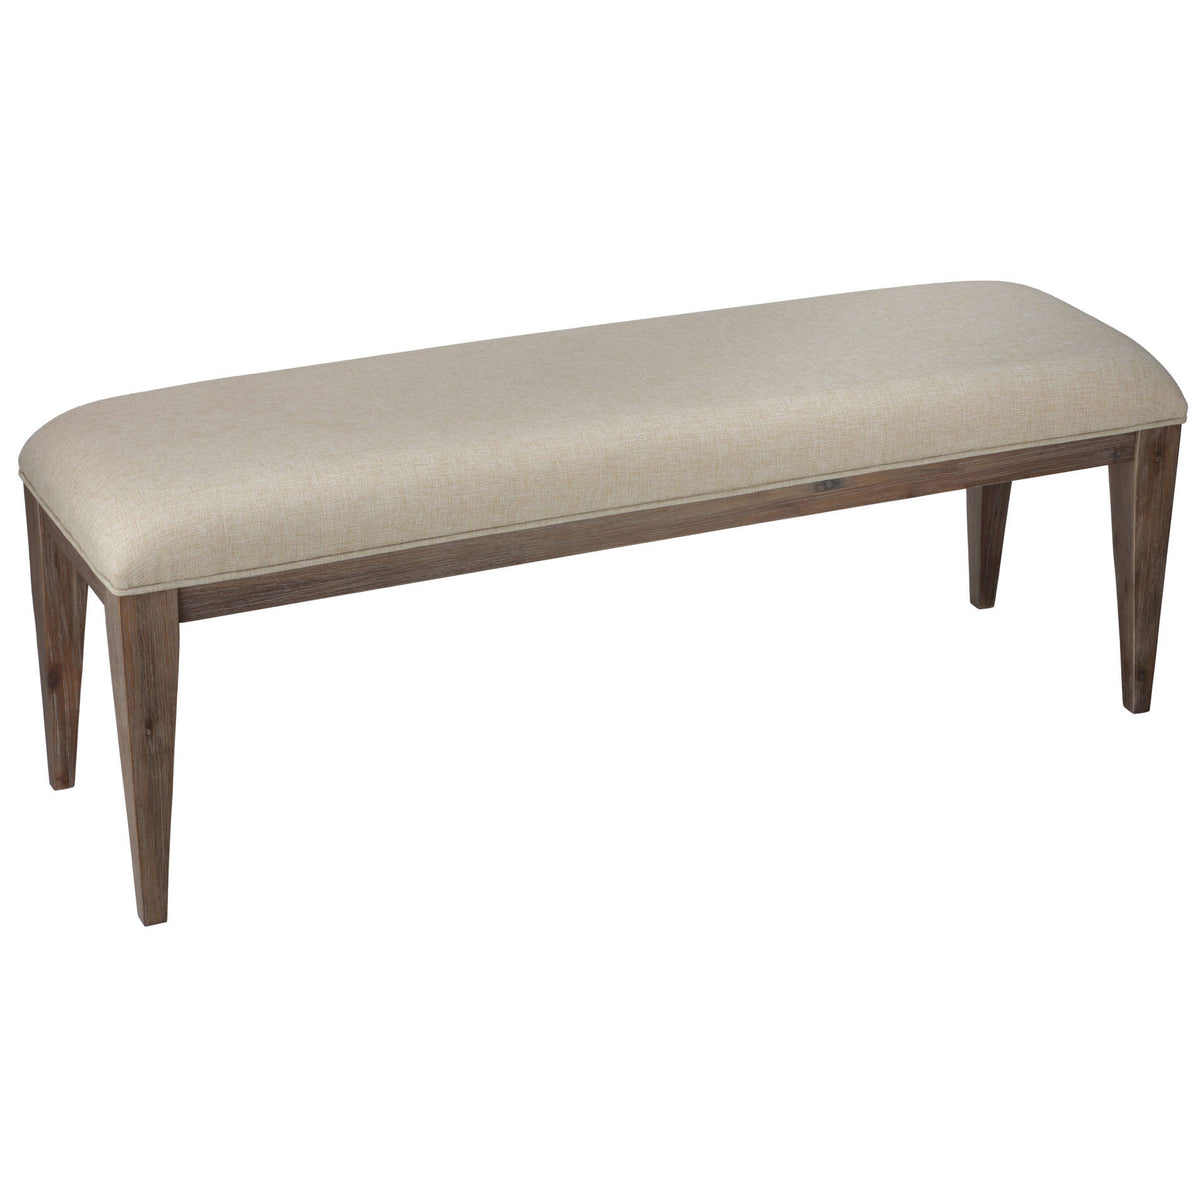 Cortesi Home Leno Bench with Neutral Linen Fabric